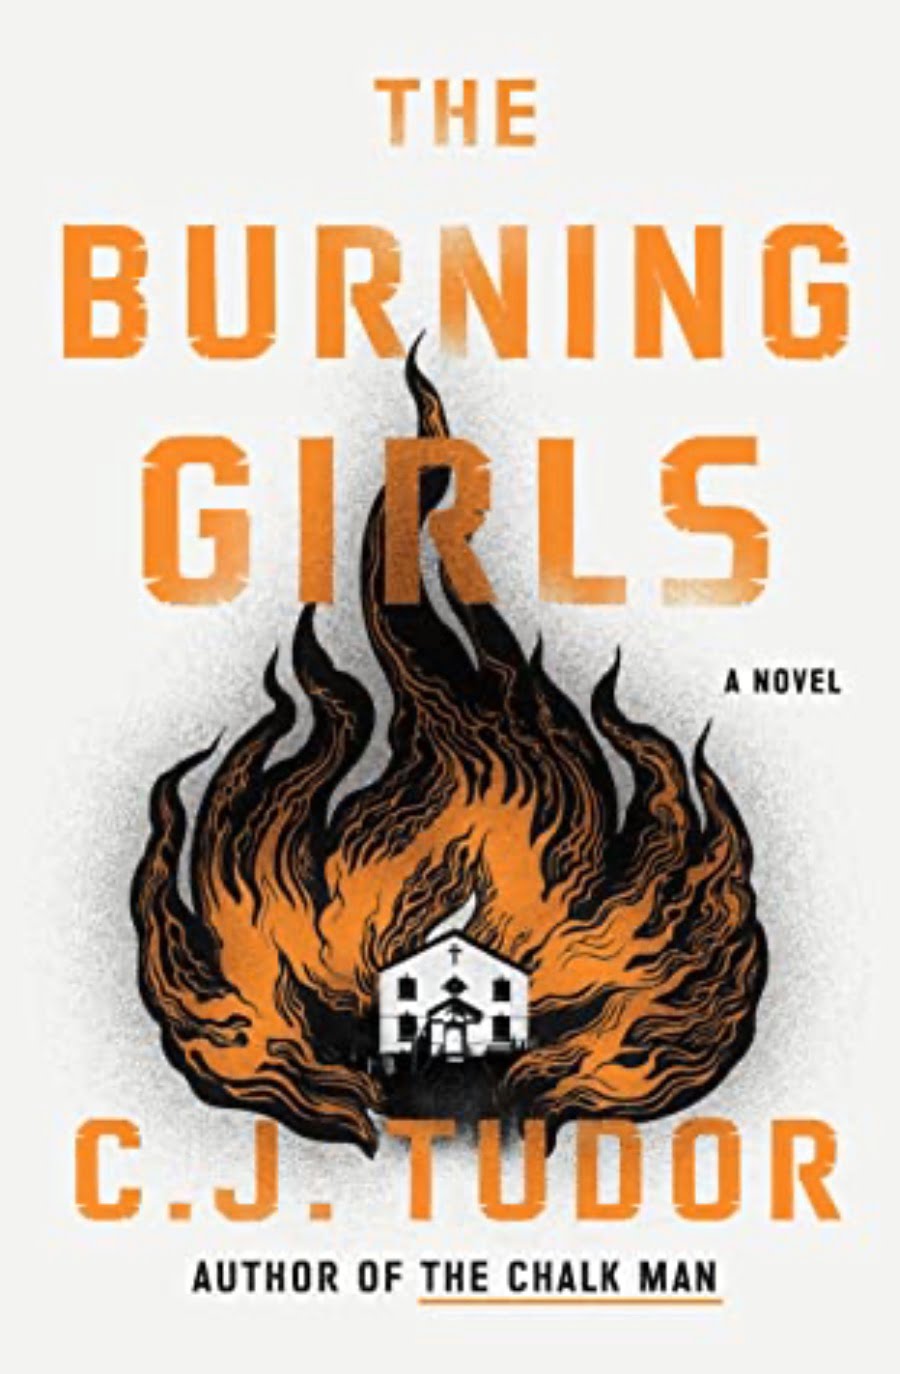 THE BURNING GIRLS BY C. J. TUDOR – BOOK REVIEW